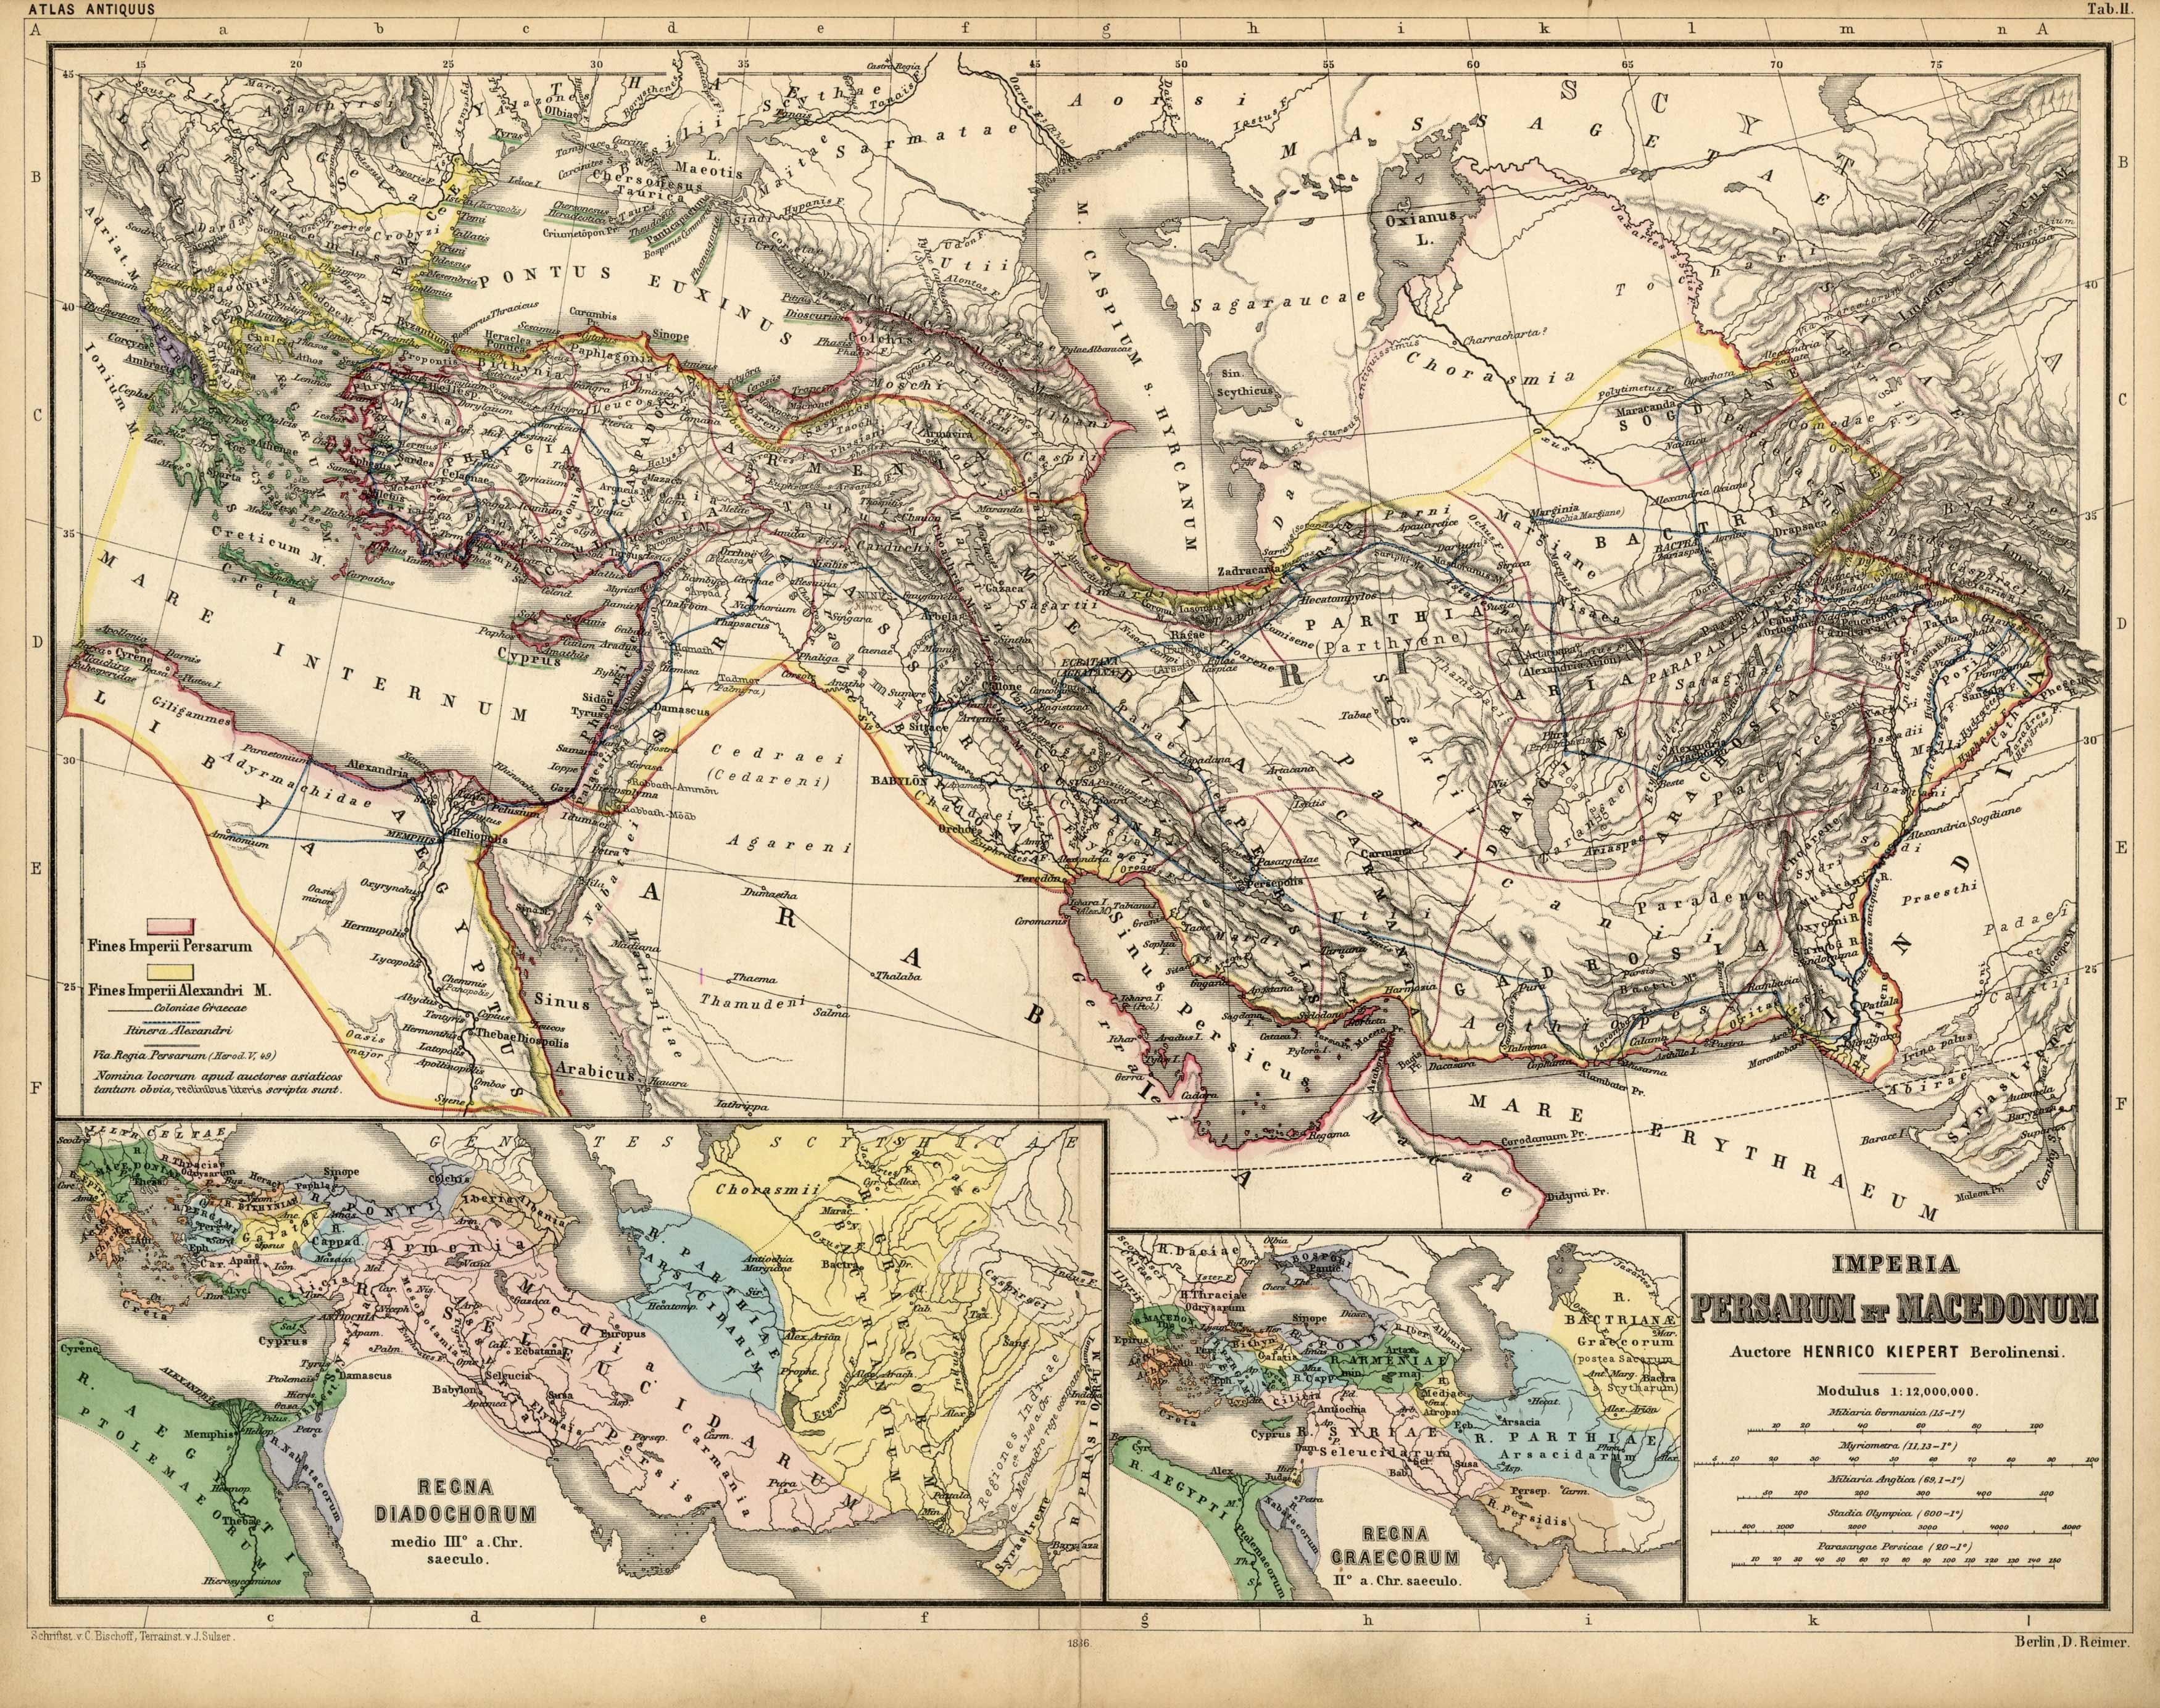 Imperia Persarum et Macedonum (Part of the Roman Empire from Greece to the eastern edge of India)